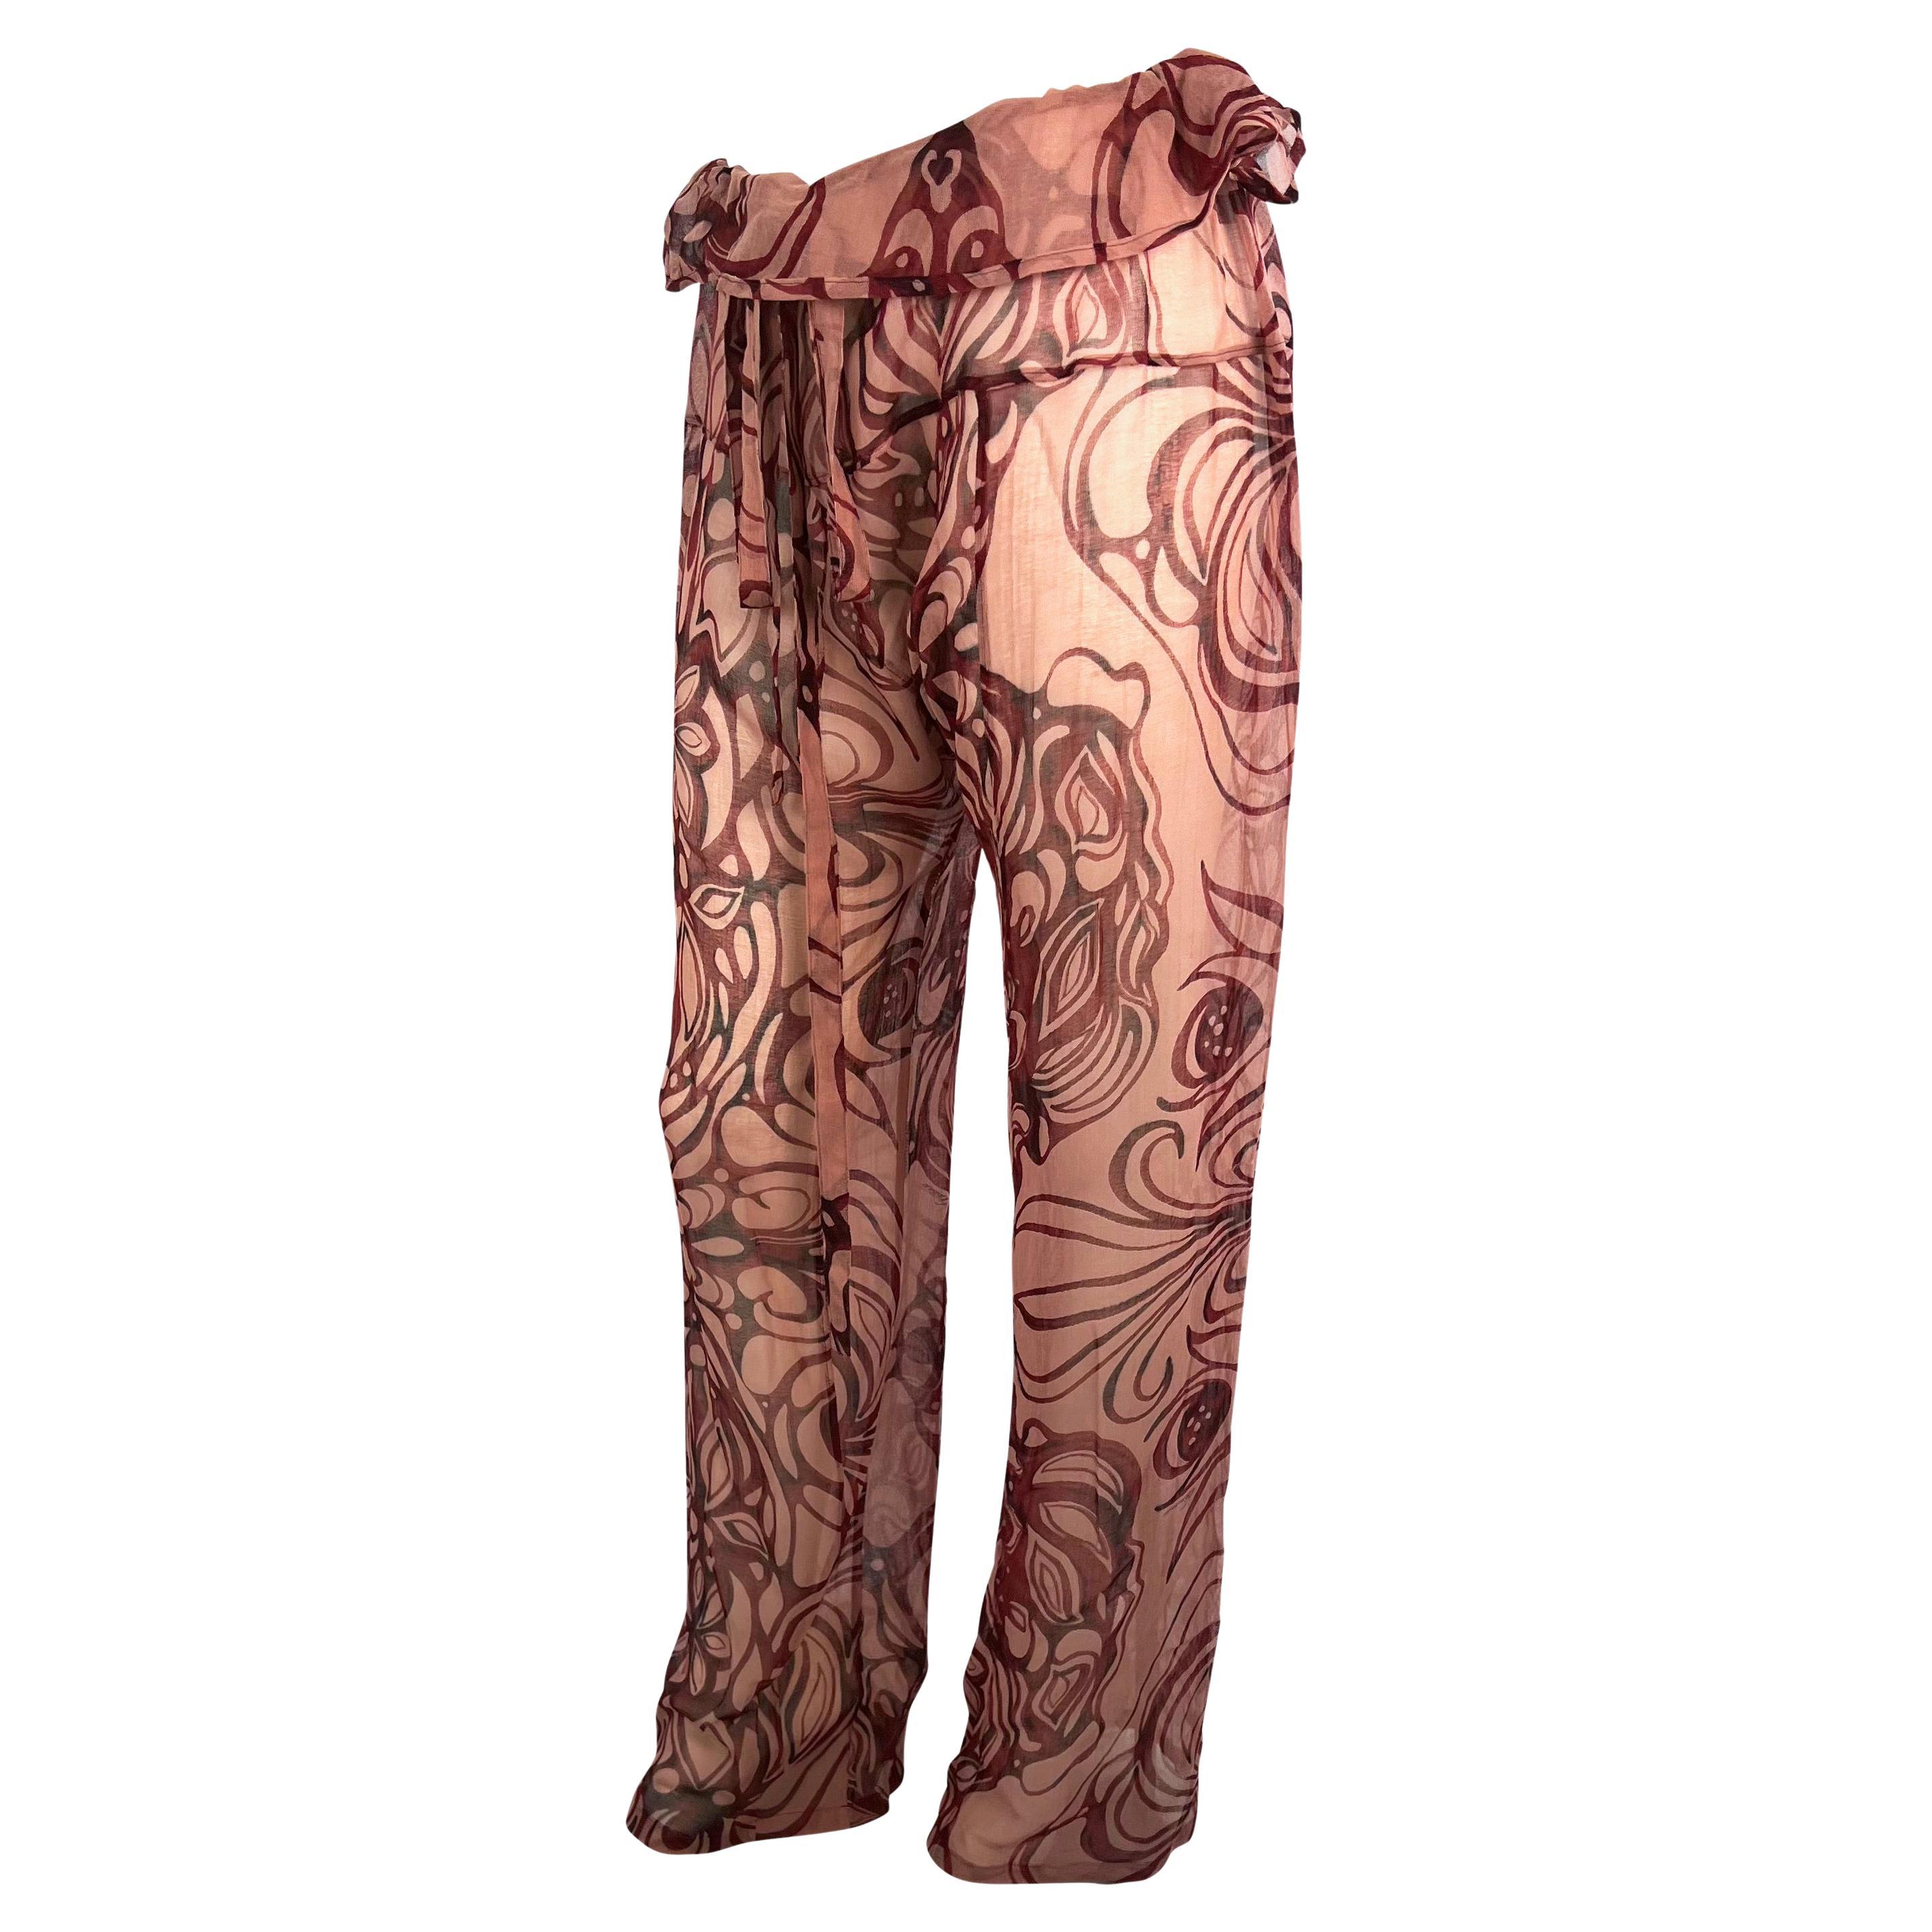 S/S 2002 Gucci von Tom Ford schiere Floral Tattoo Strand Coverup Pant Set NWT im Angebot 3